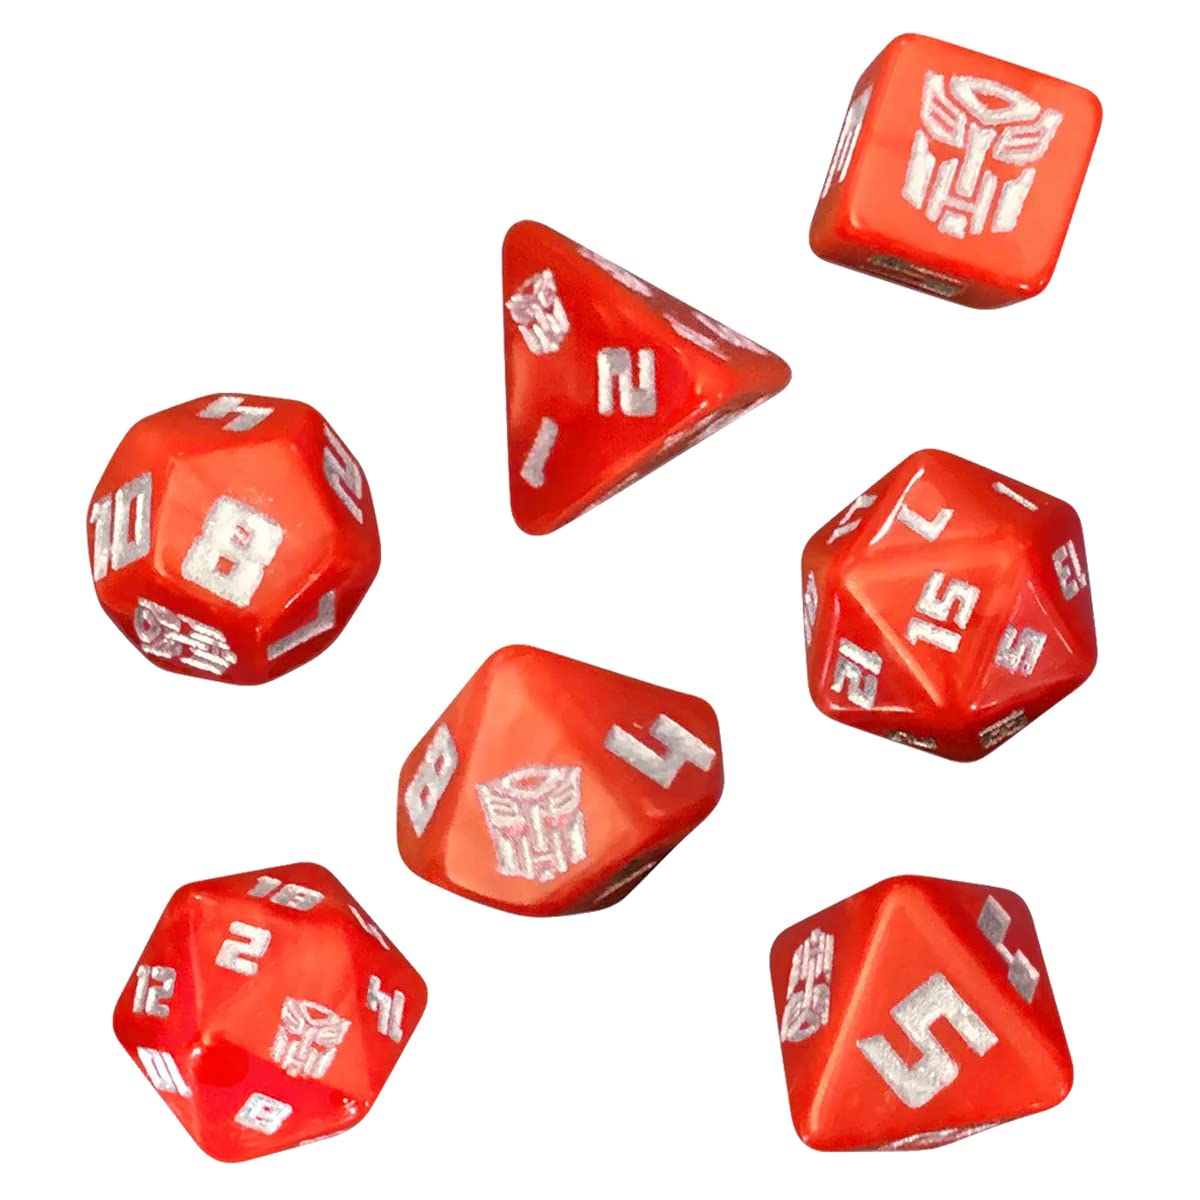 Transformers Roleplaying Gam e Dice Set